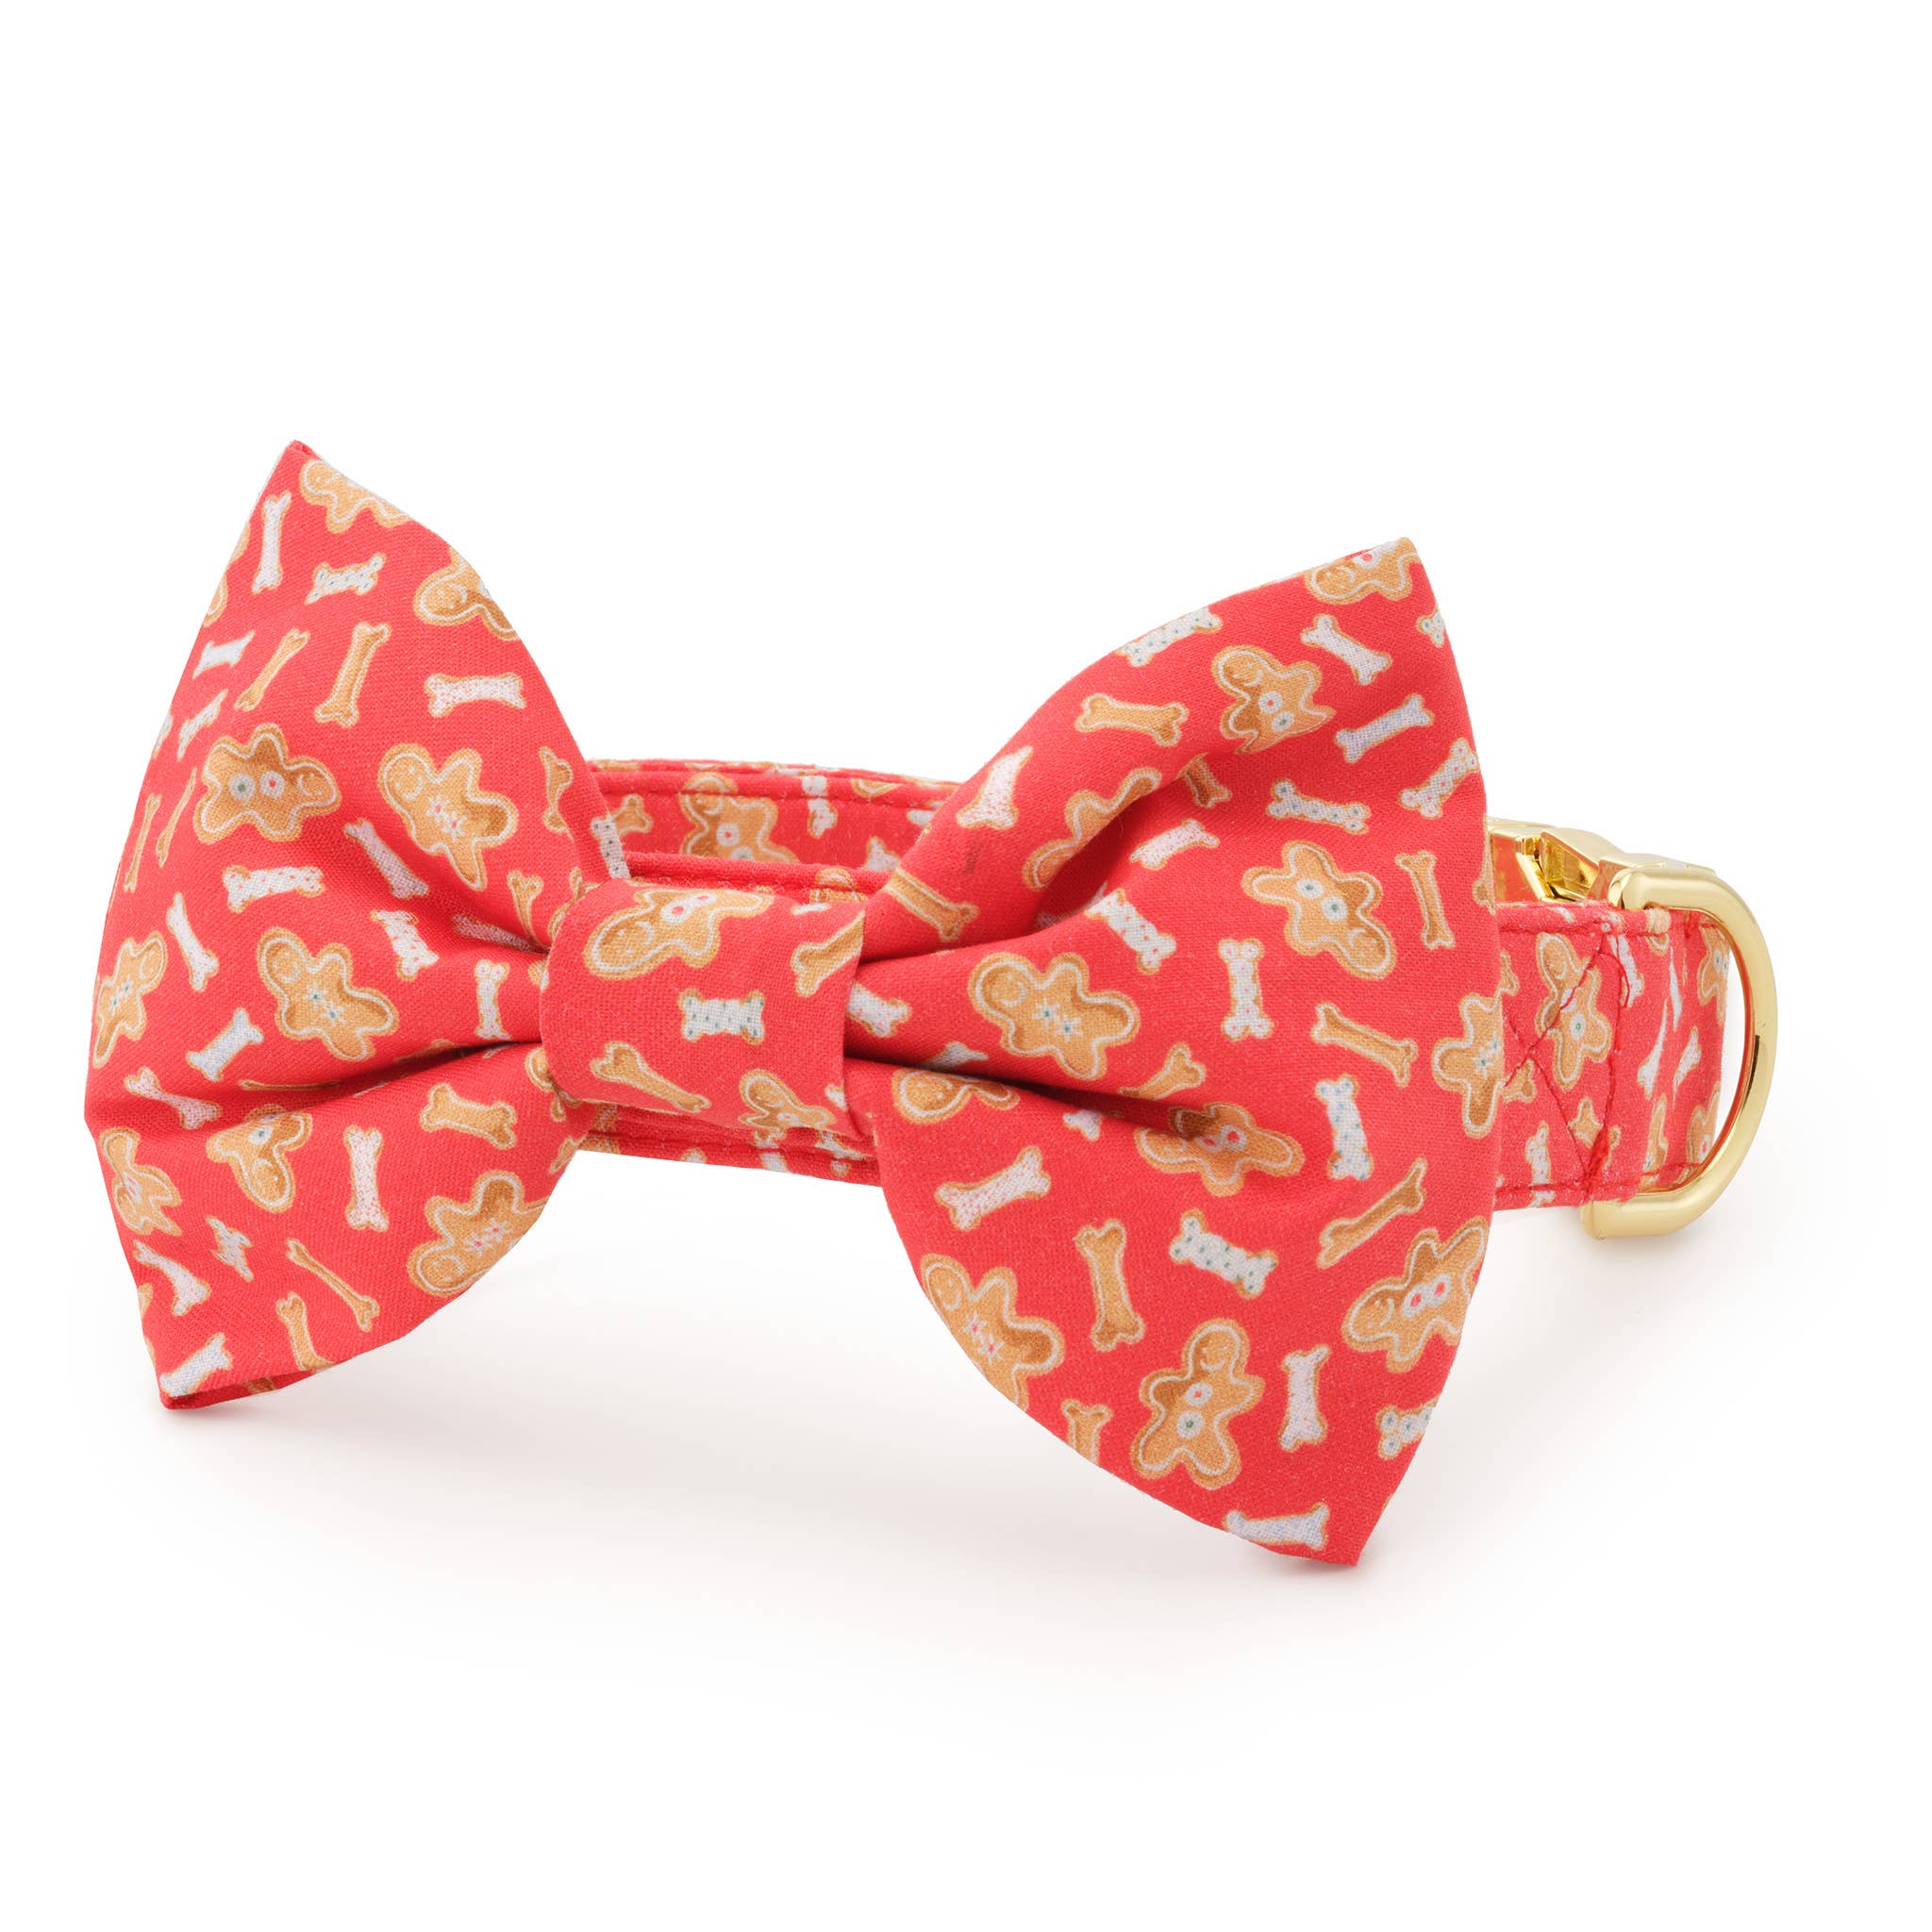 The Foggy Dog - Baking Spirits Bright Holiday Bow Tie: Standard